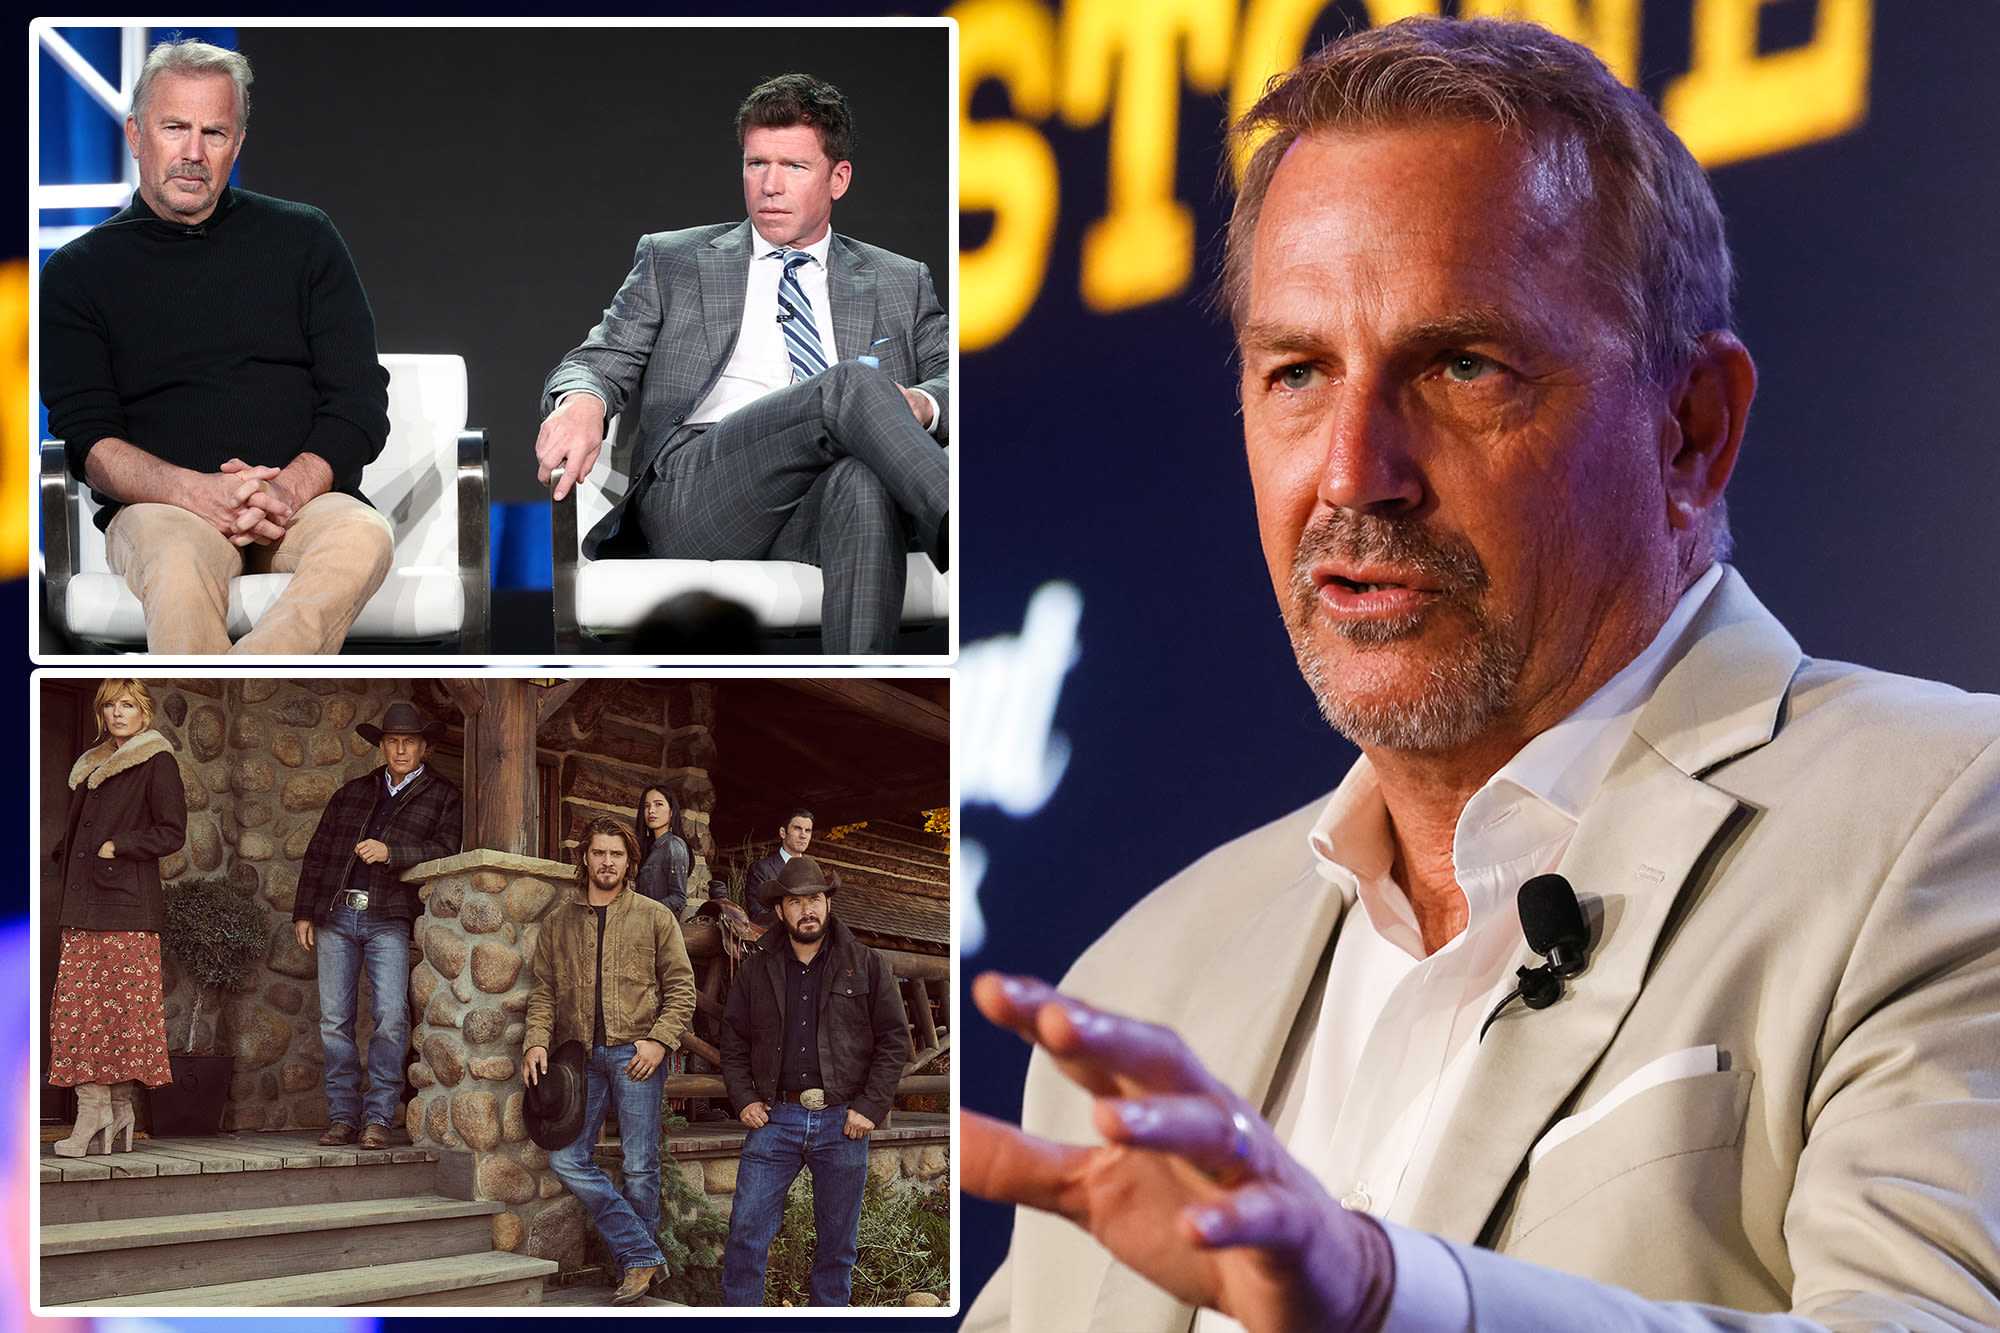 Kevin Costner slams ‘Yellowstone’ producers for ‘bulls–t’ drama, contract dispute: ‘I have taken a beating from those f–king guys’